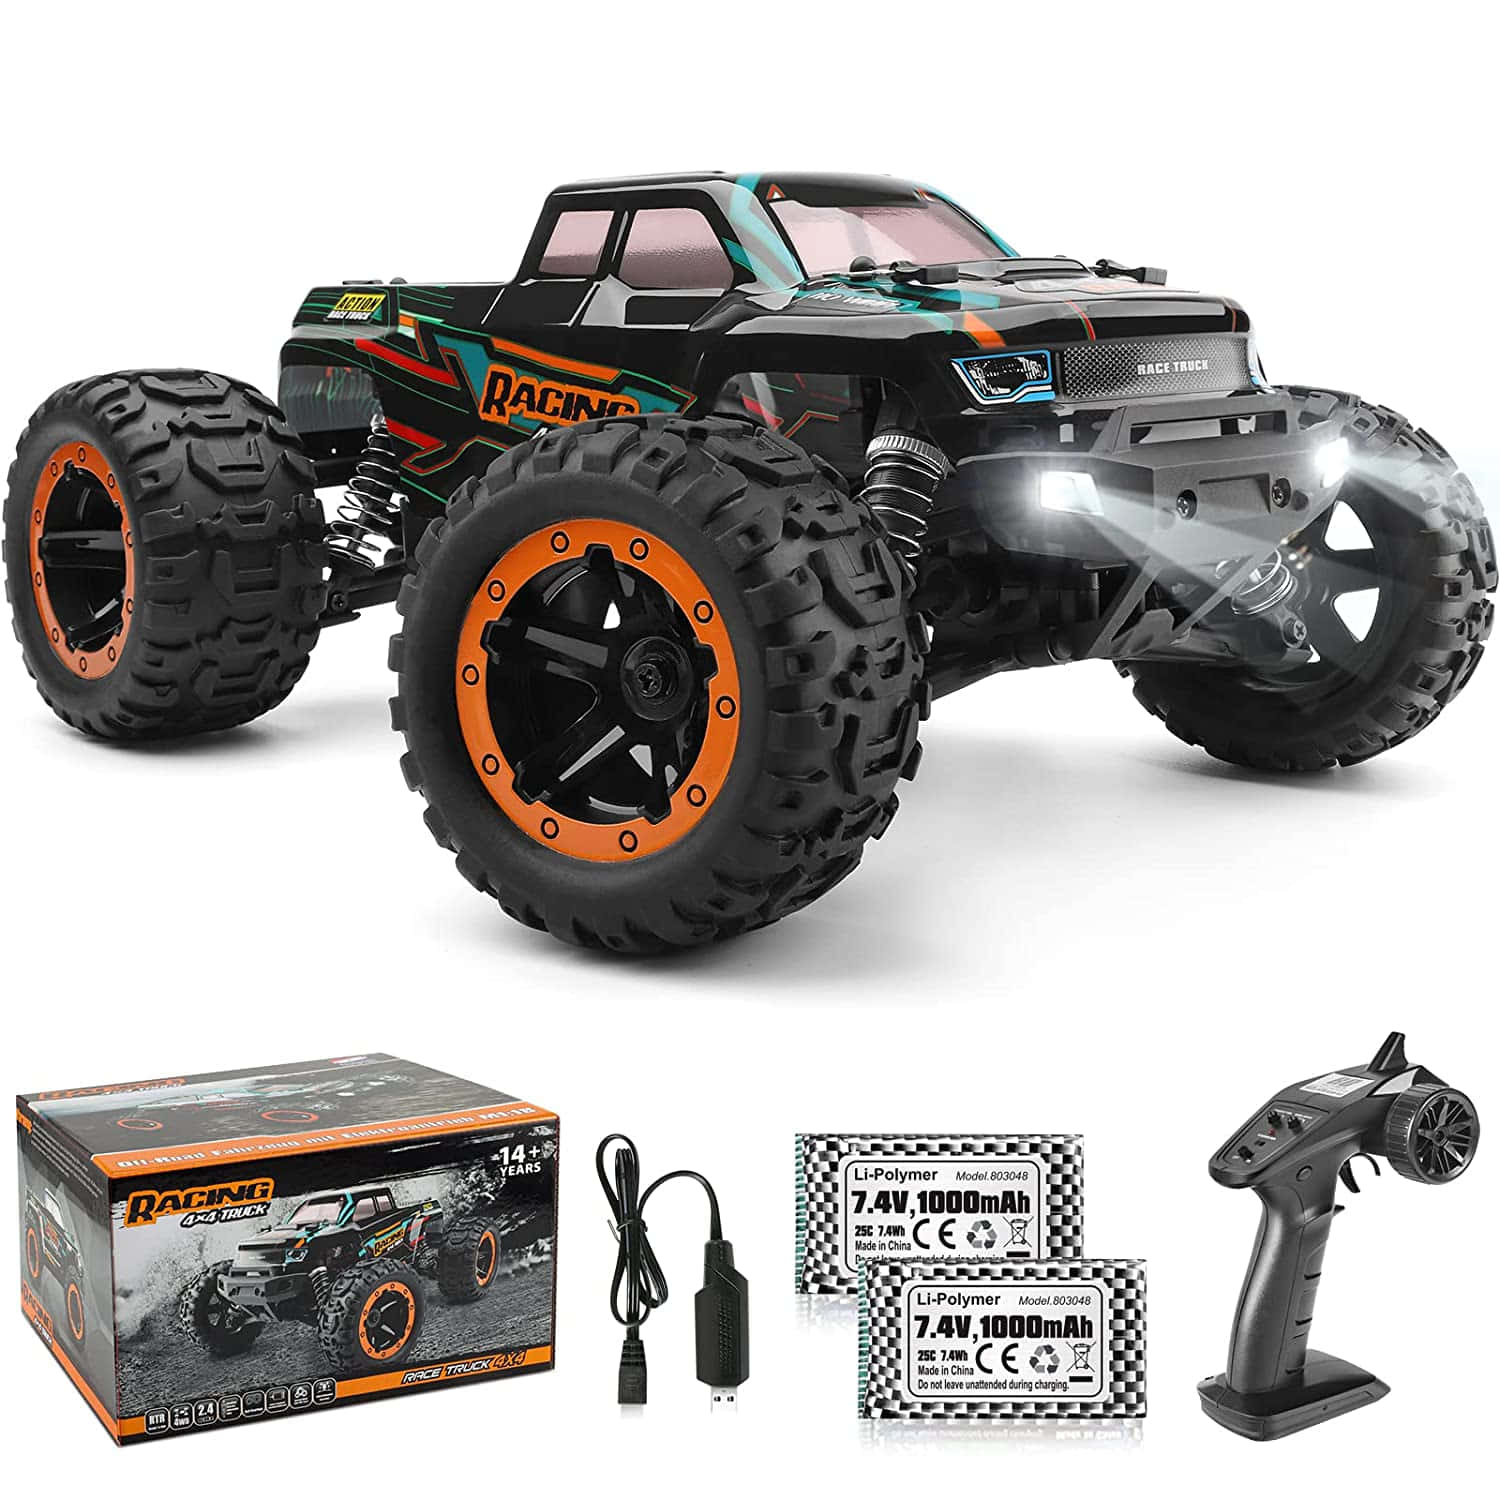 A Remote Control Monster Truck With A Remote Control